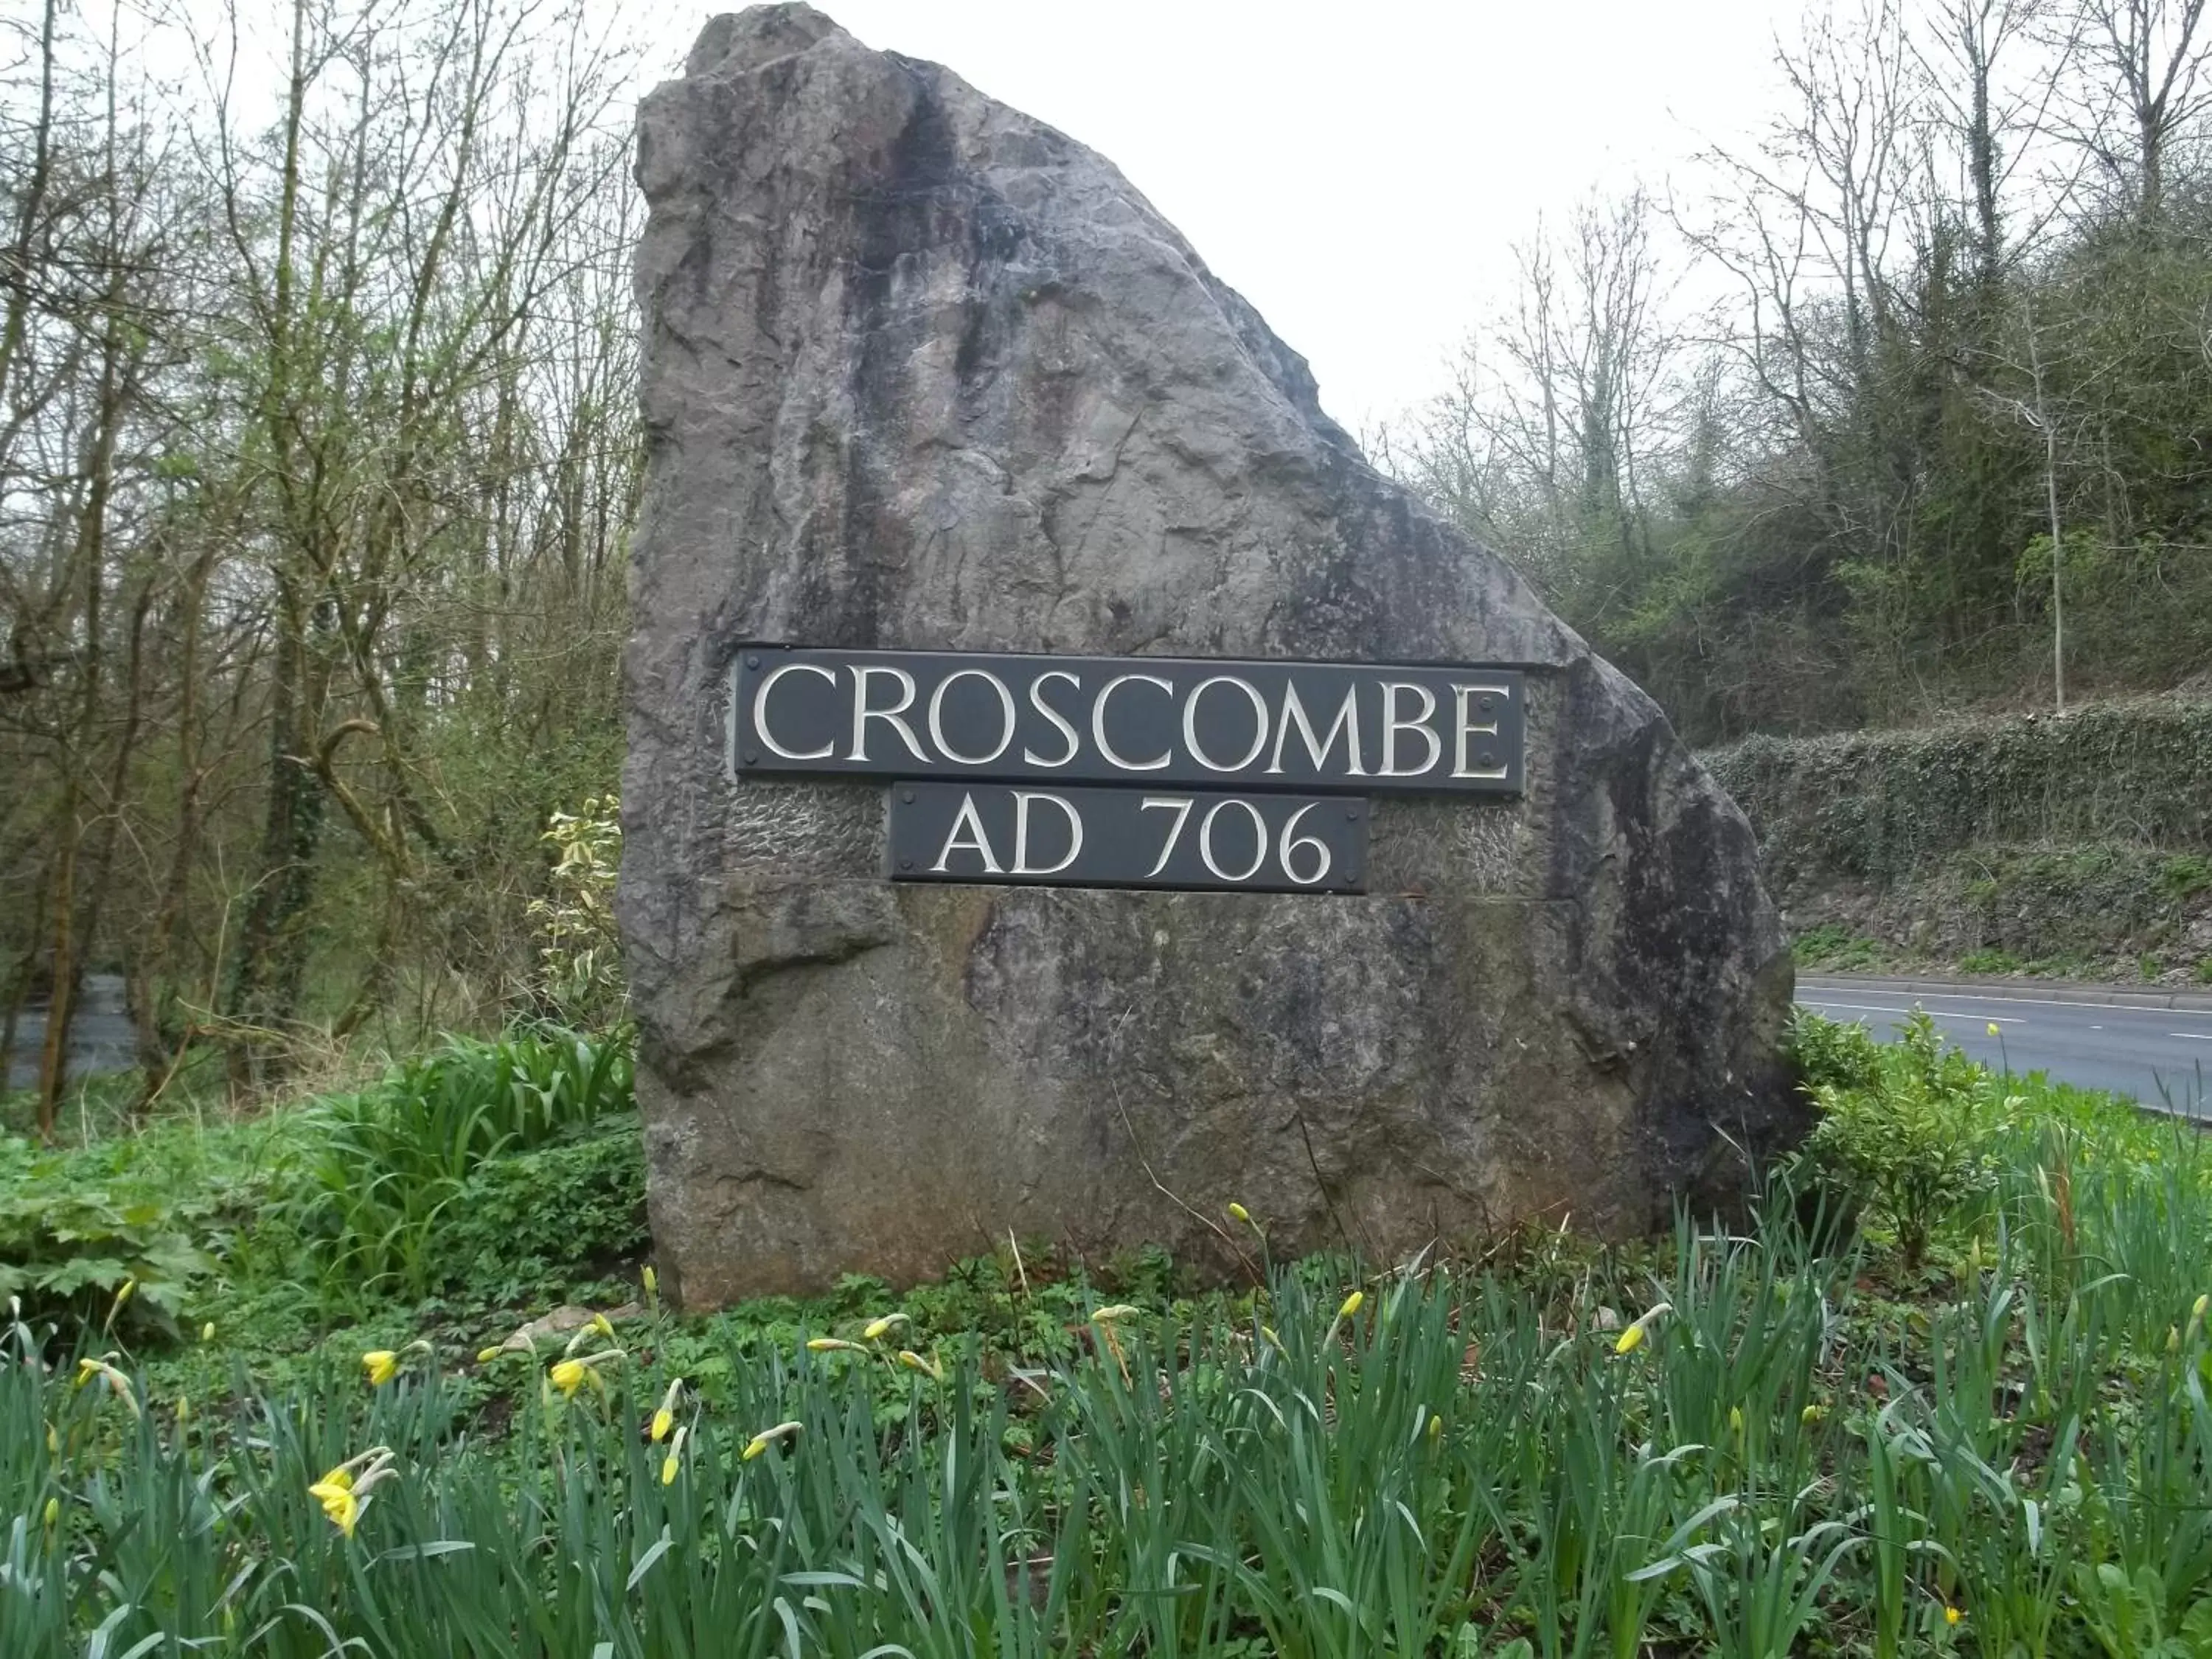 Day in The Cross at Croscombe